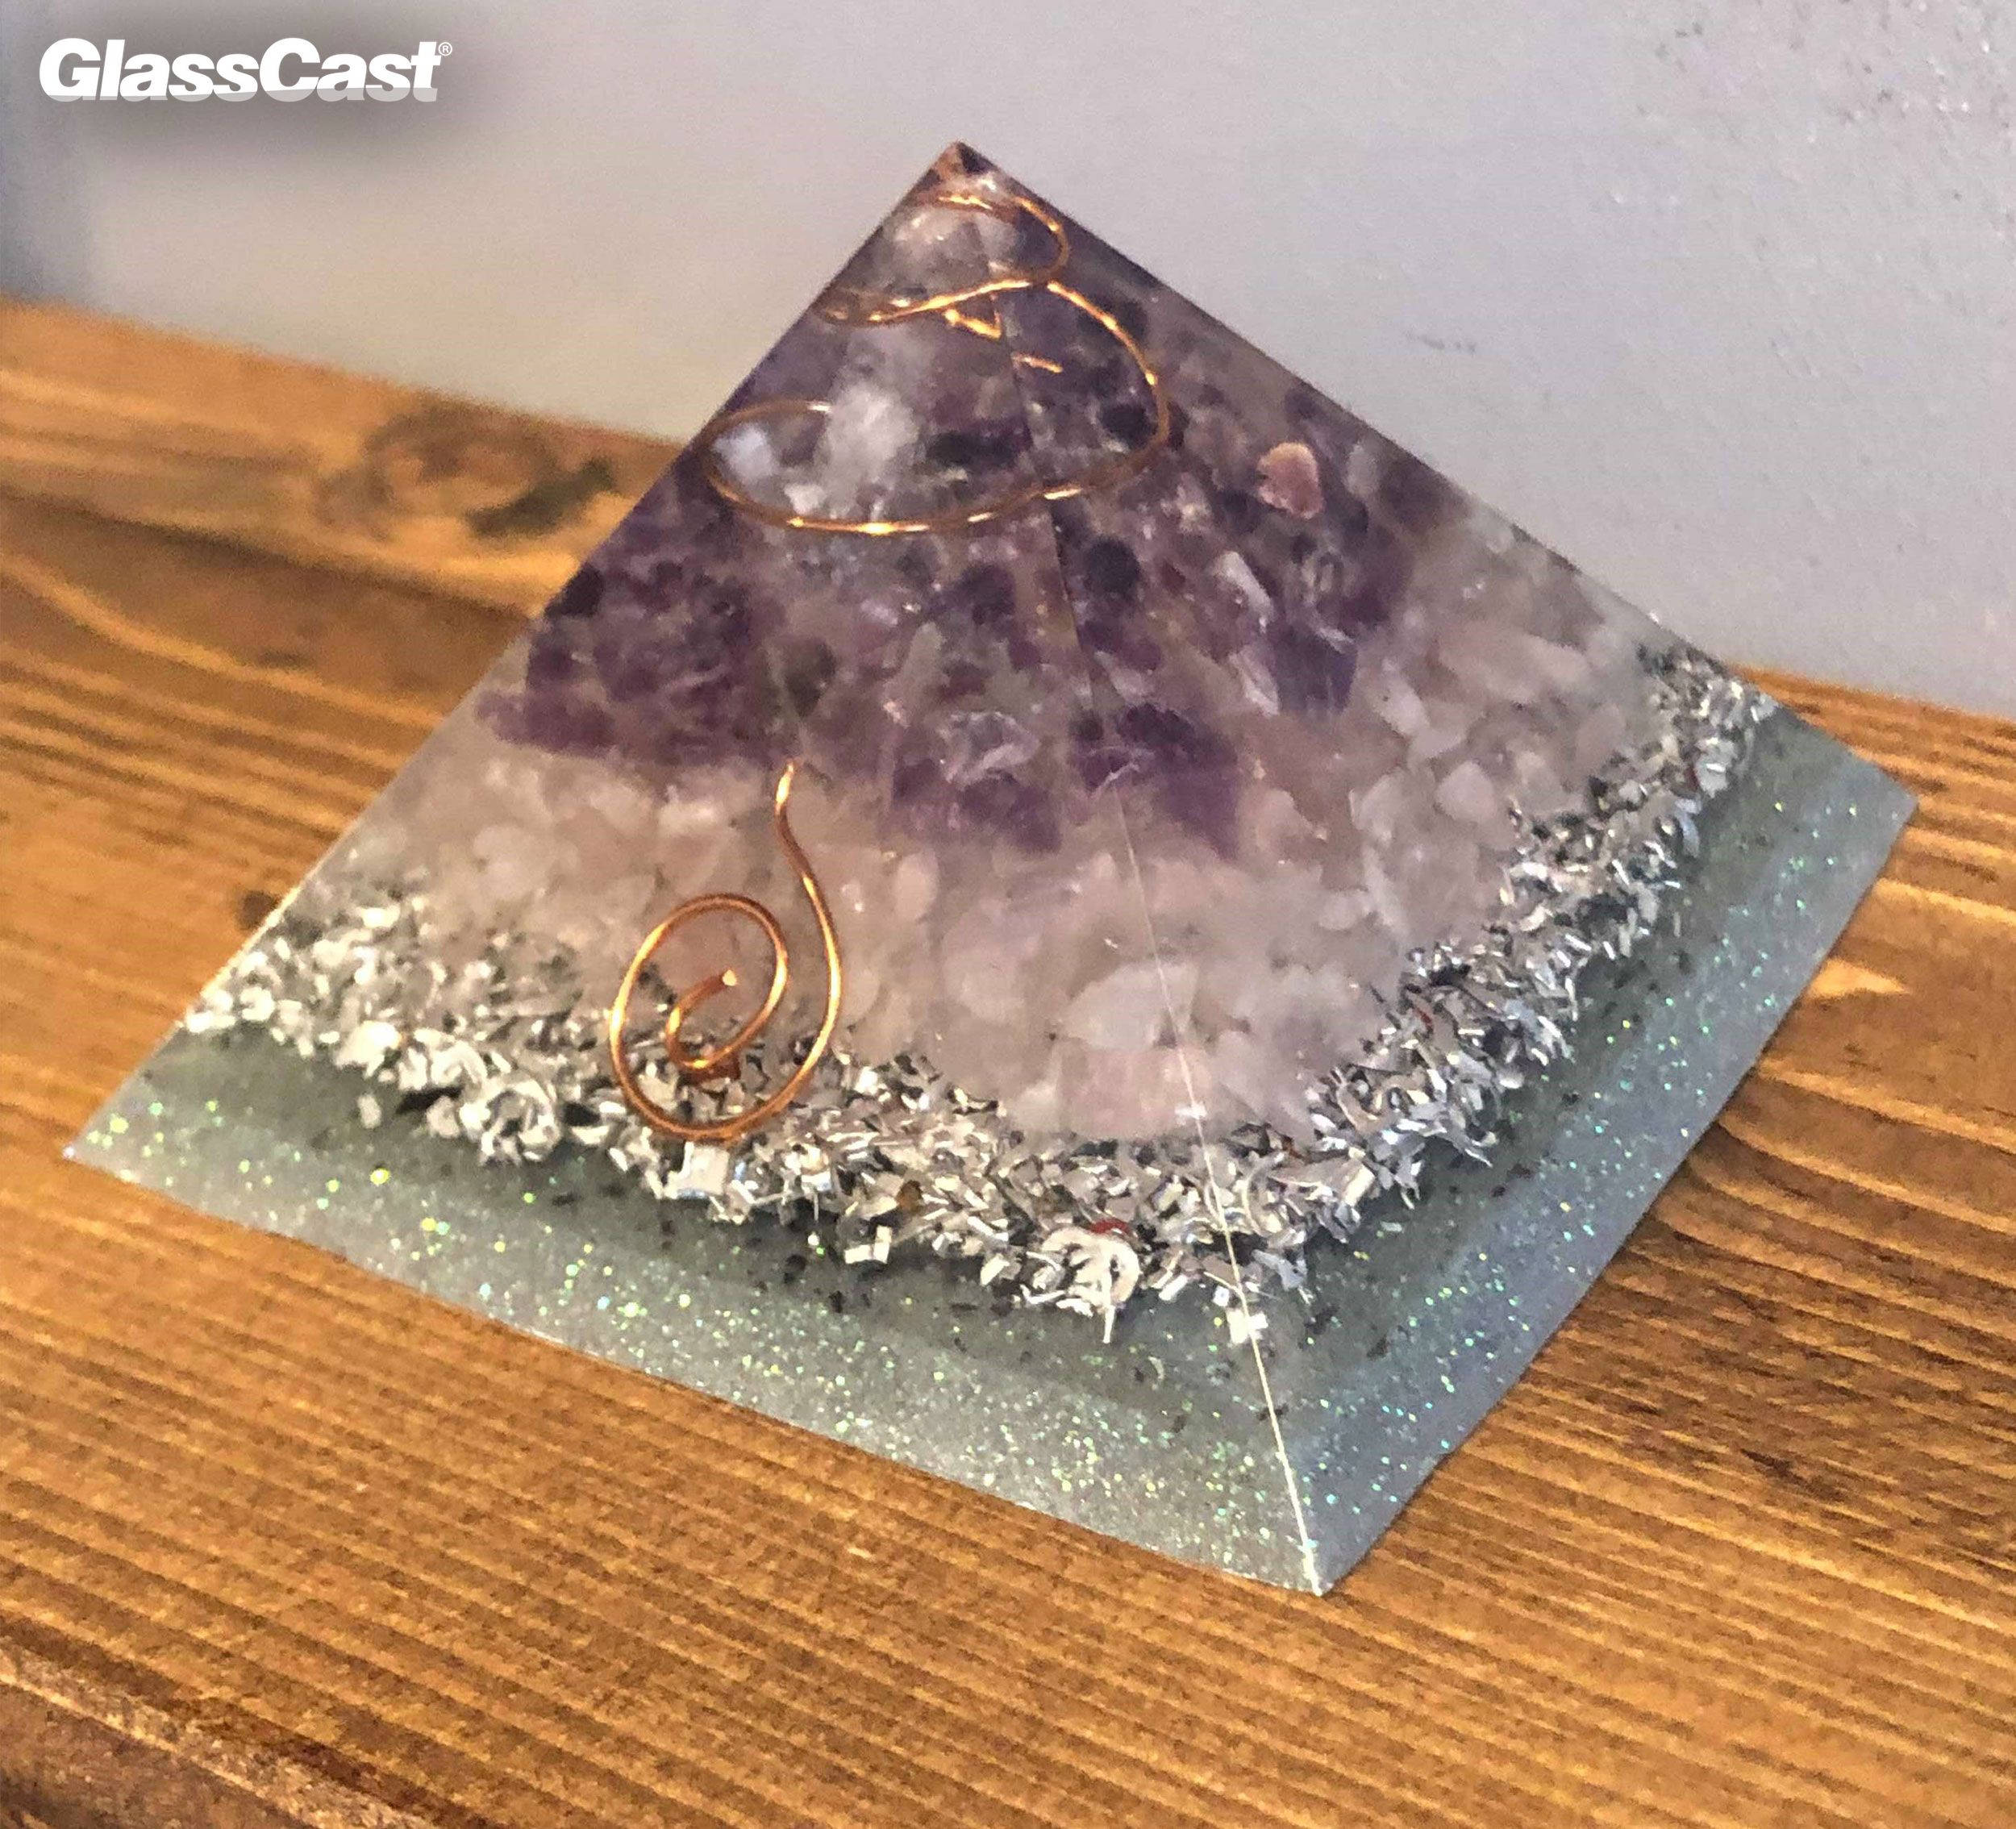 DIY Resin Pyramid - Your Questions Answered!! 